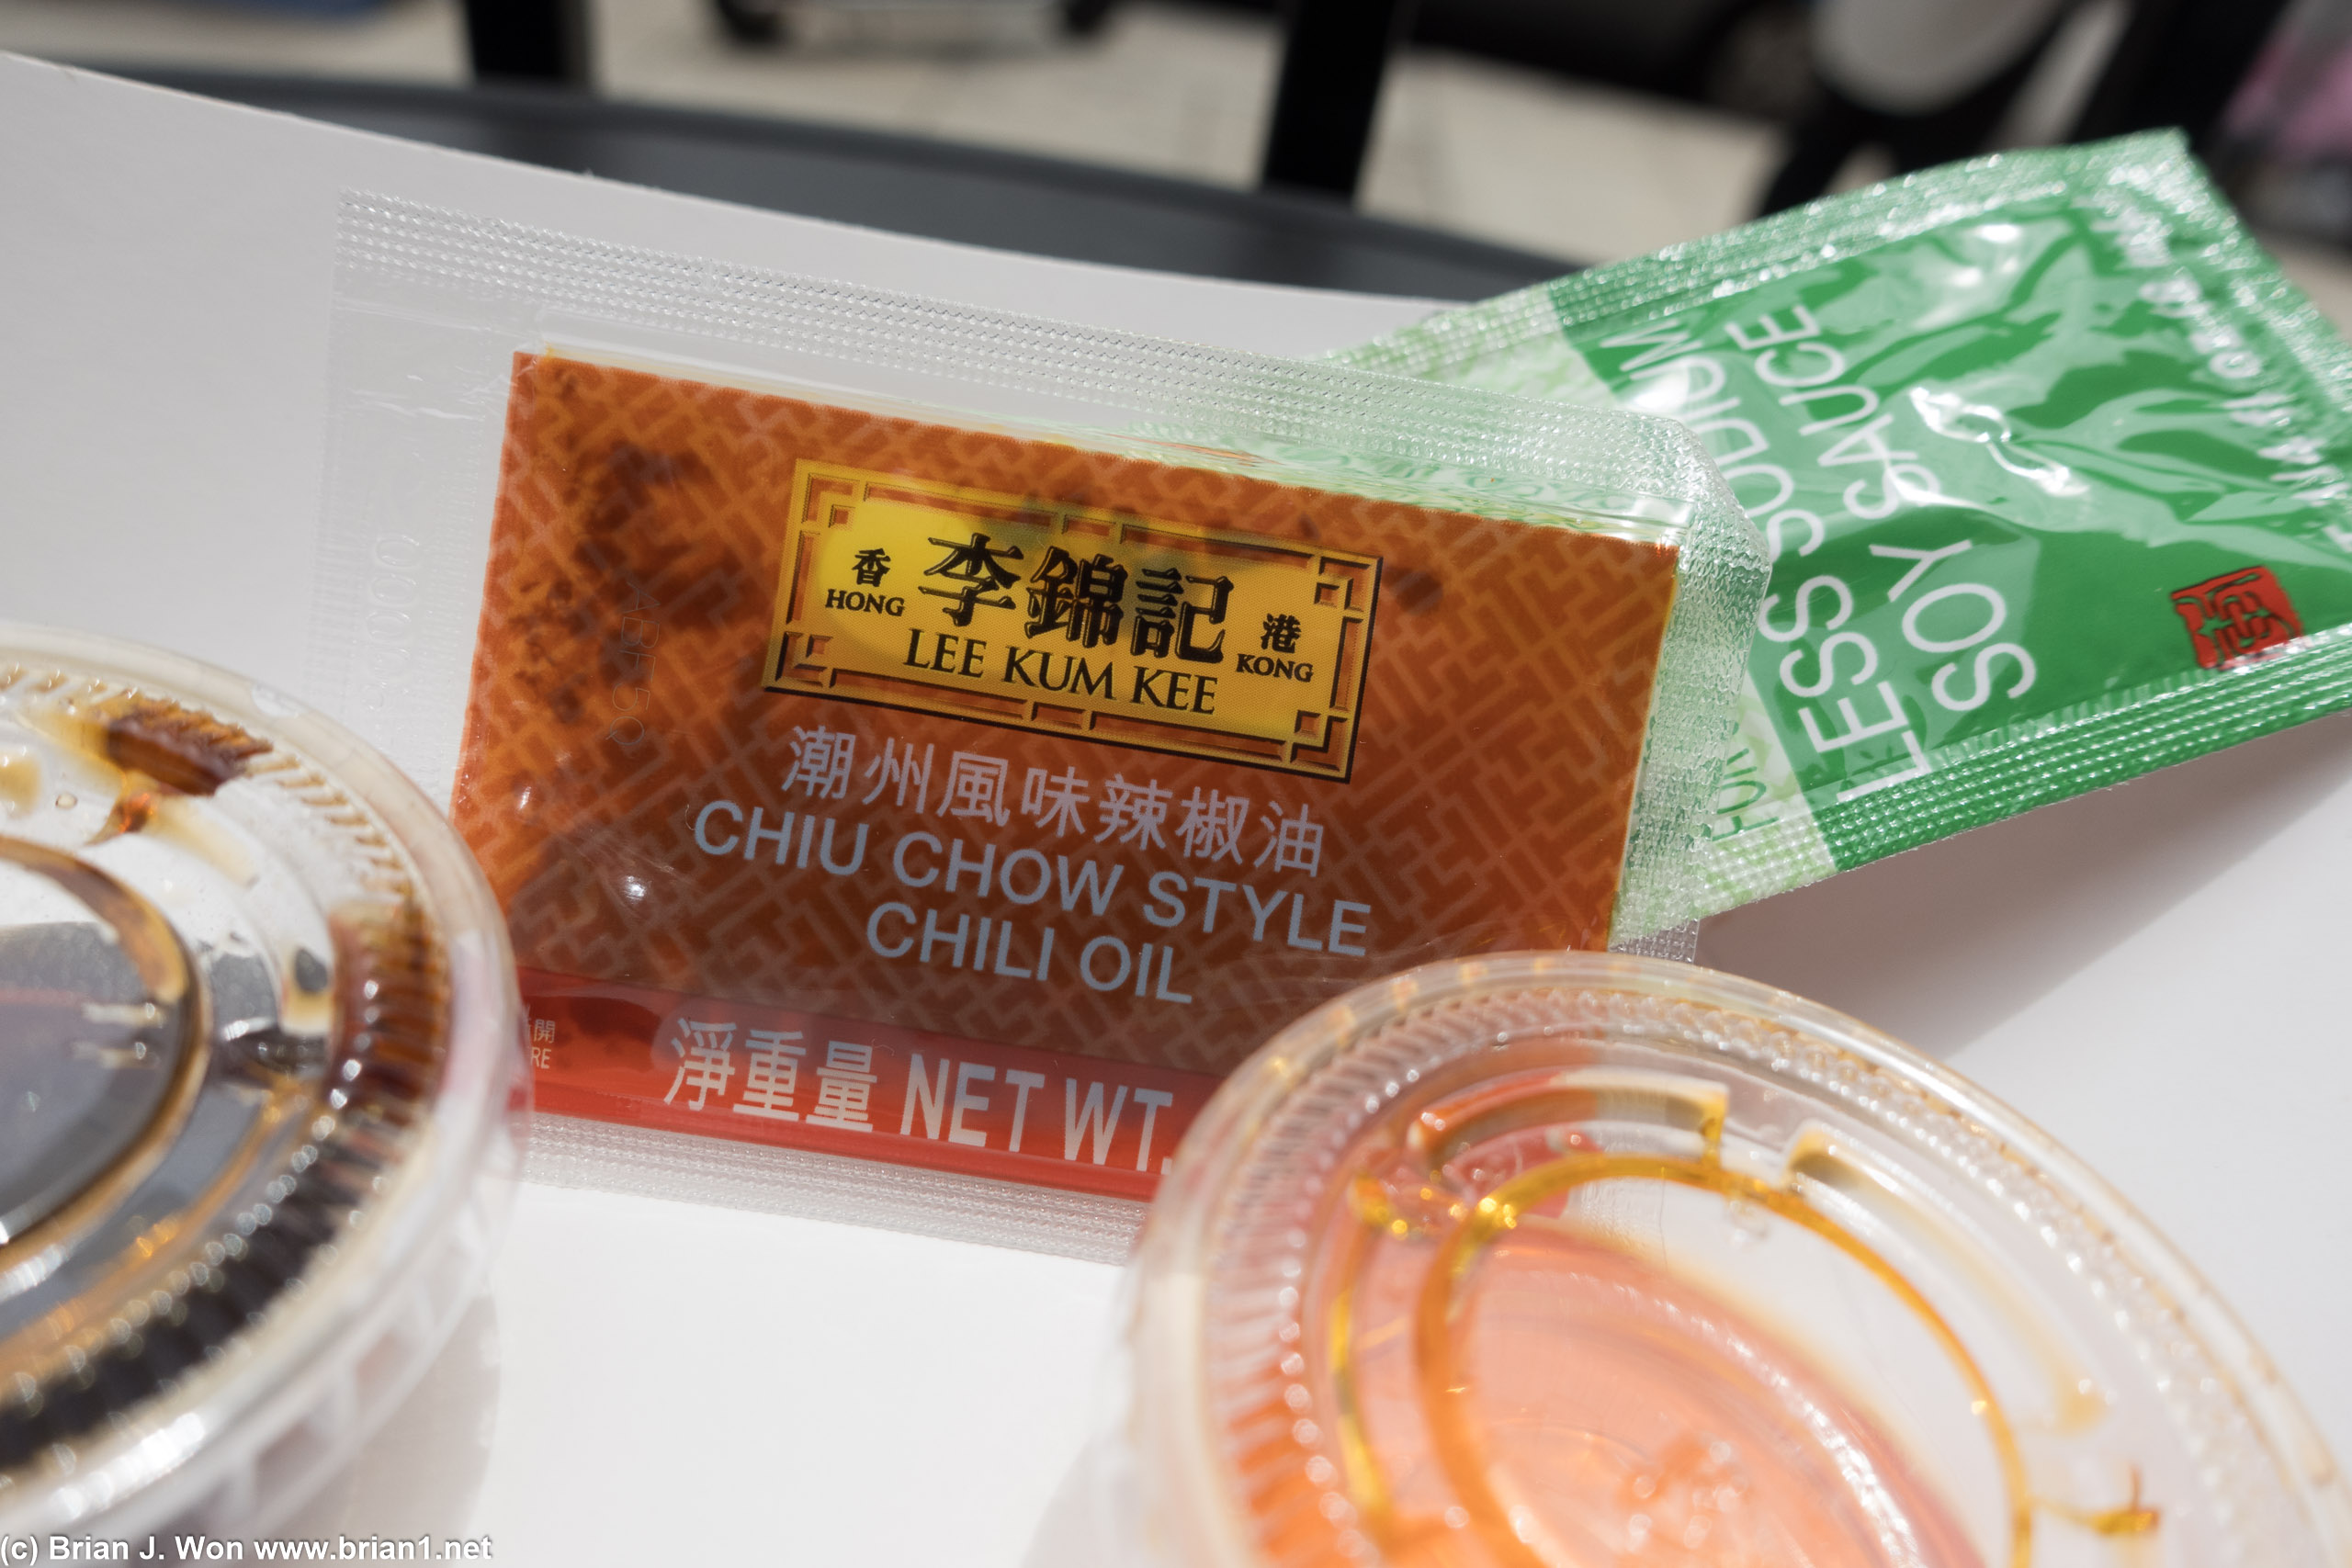 Lee Kum Kee Chiu Chow style chili oil was actually spicy.